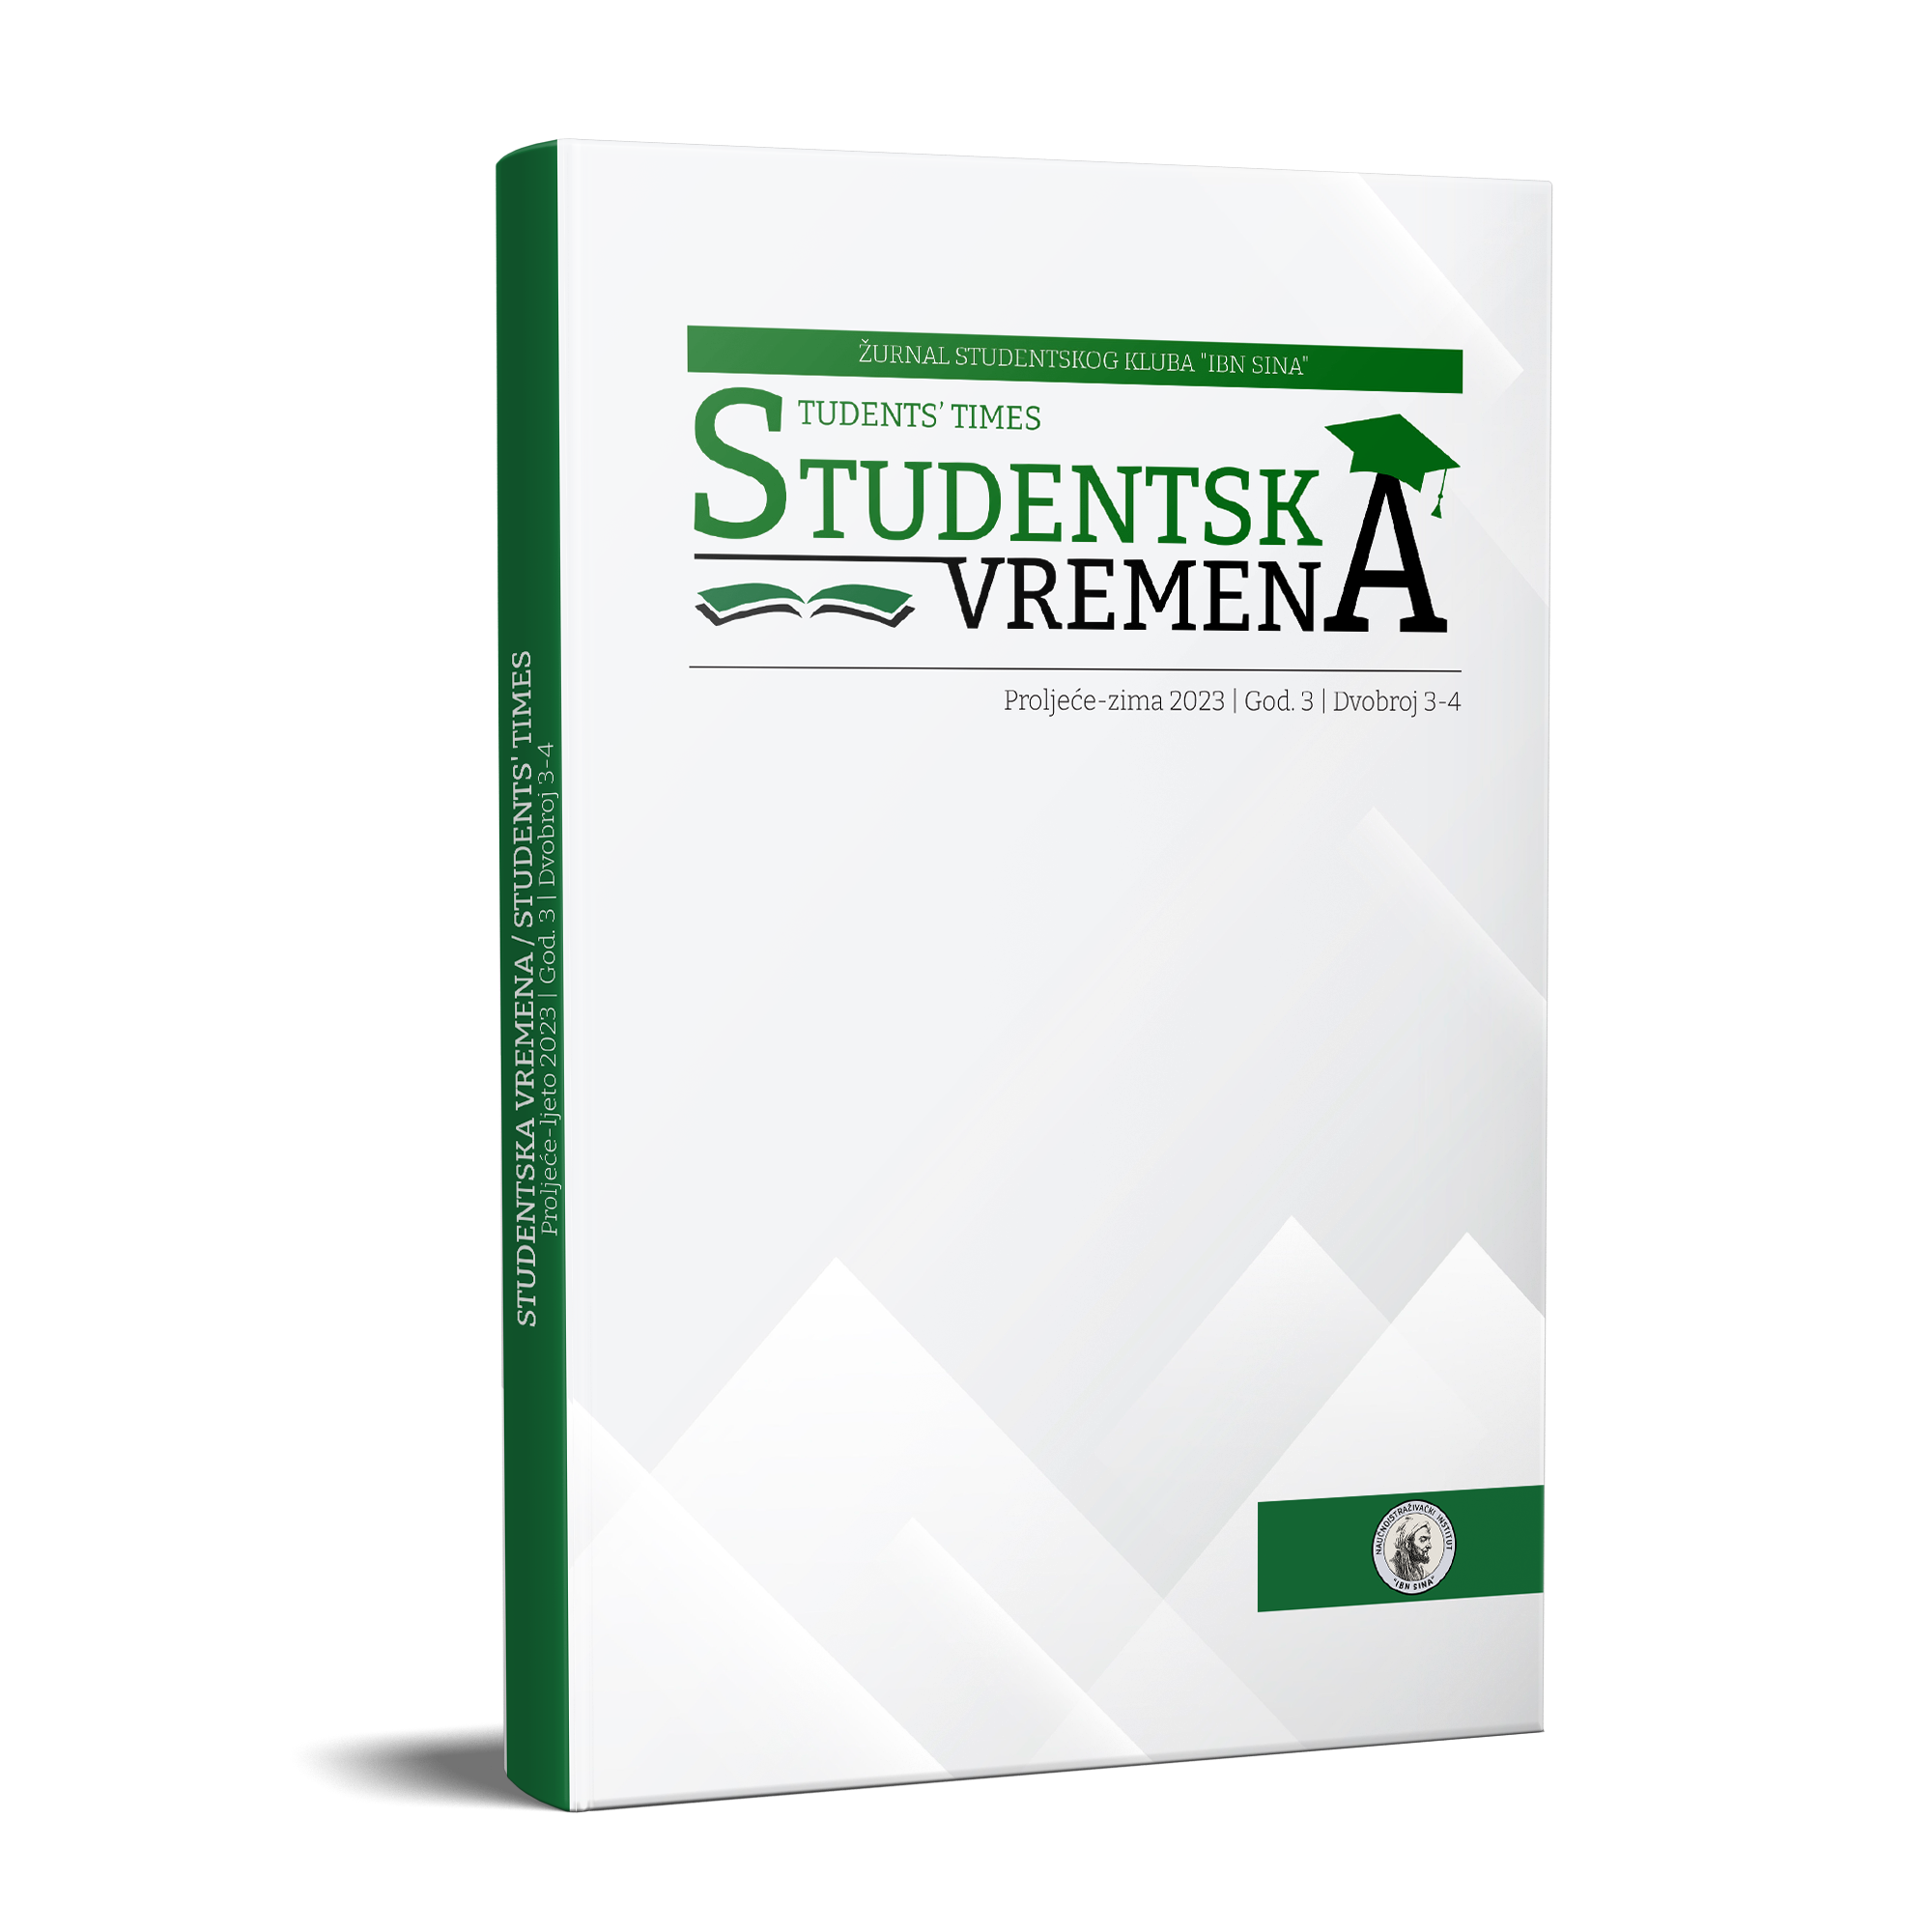 A New Volume of the “Students’ Times/Studentska vremena” Journal (no. 3-4) is Published